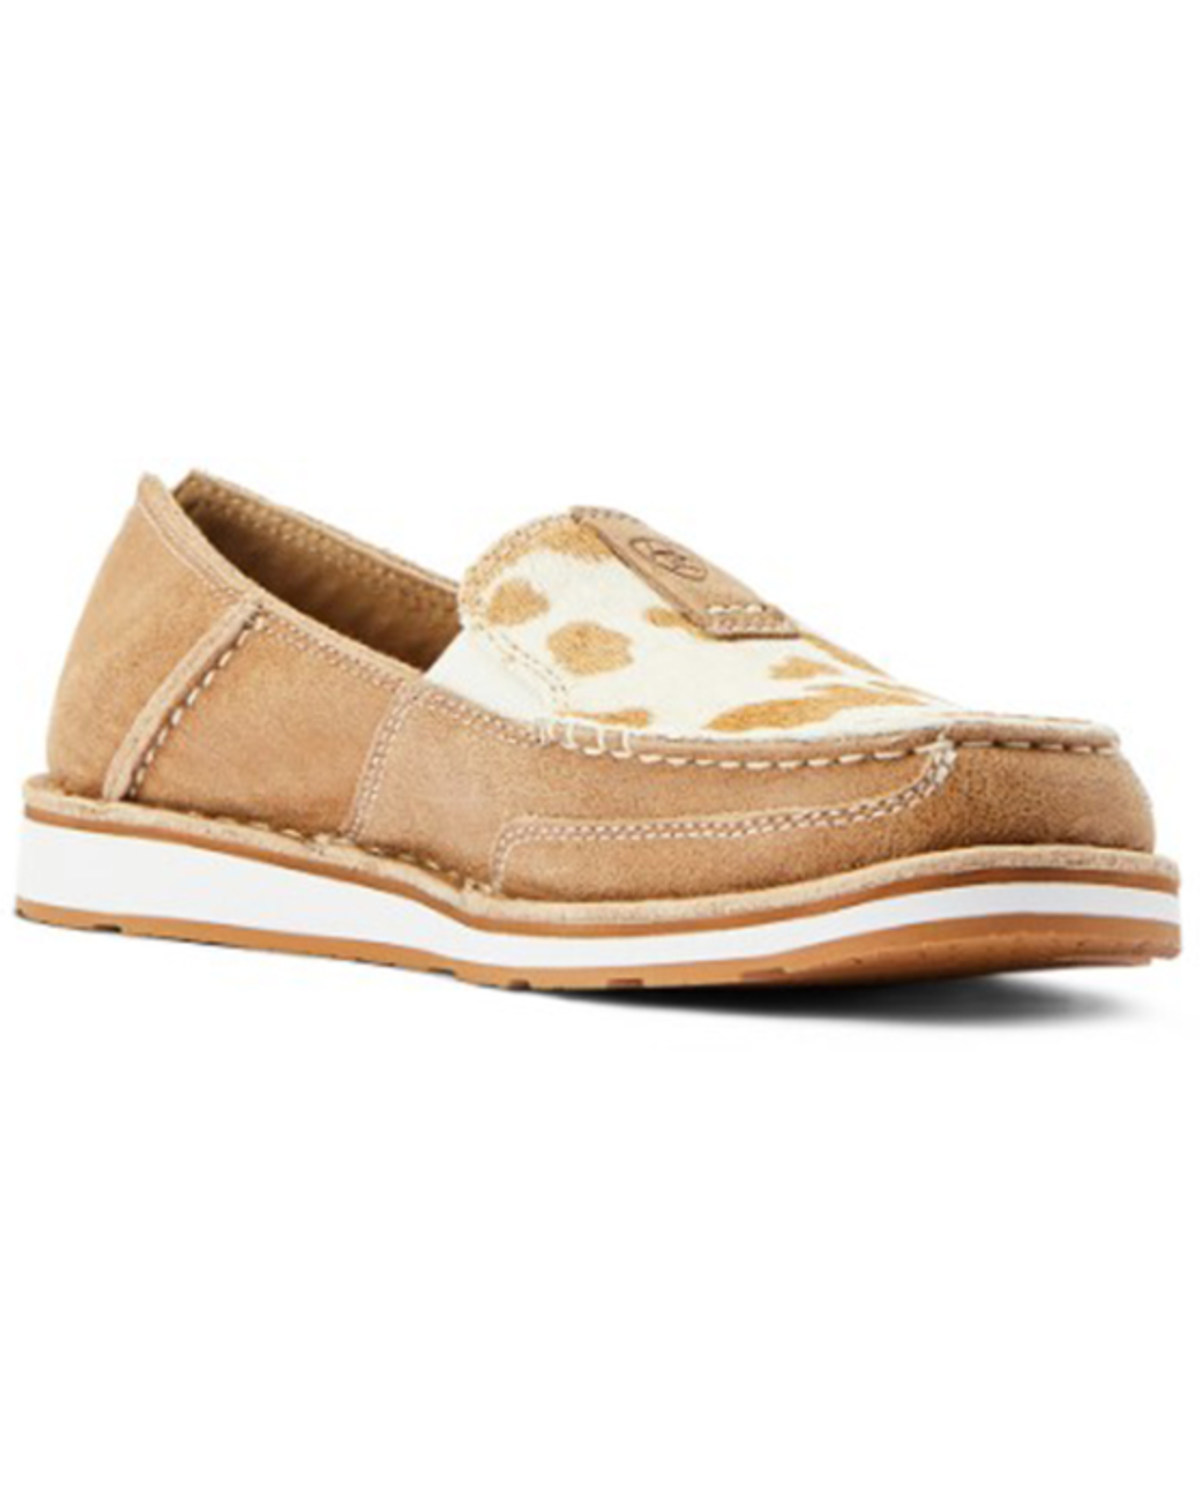 Ariat Women's Hair-On Casual Cruiser Shoes - Moc Toe